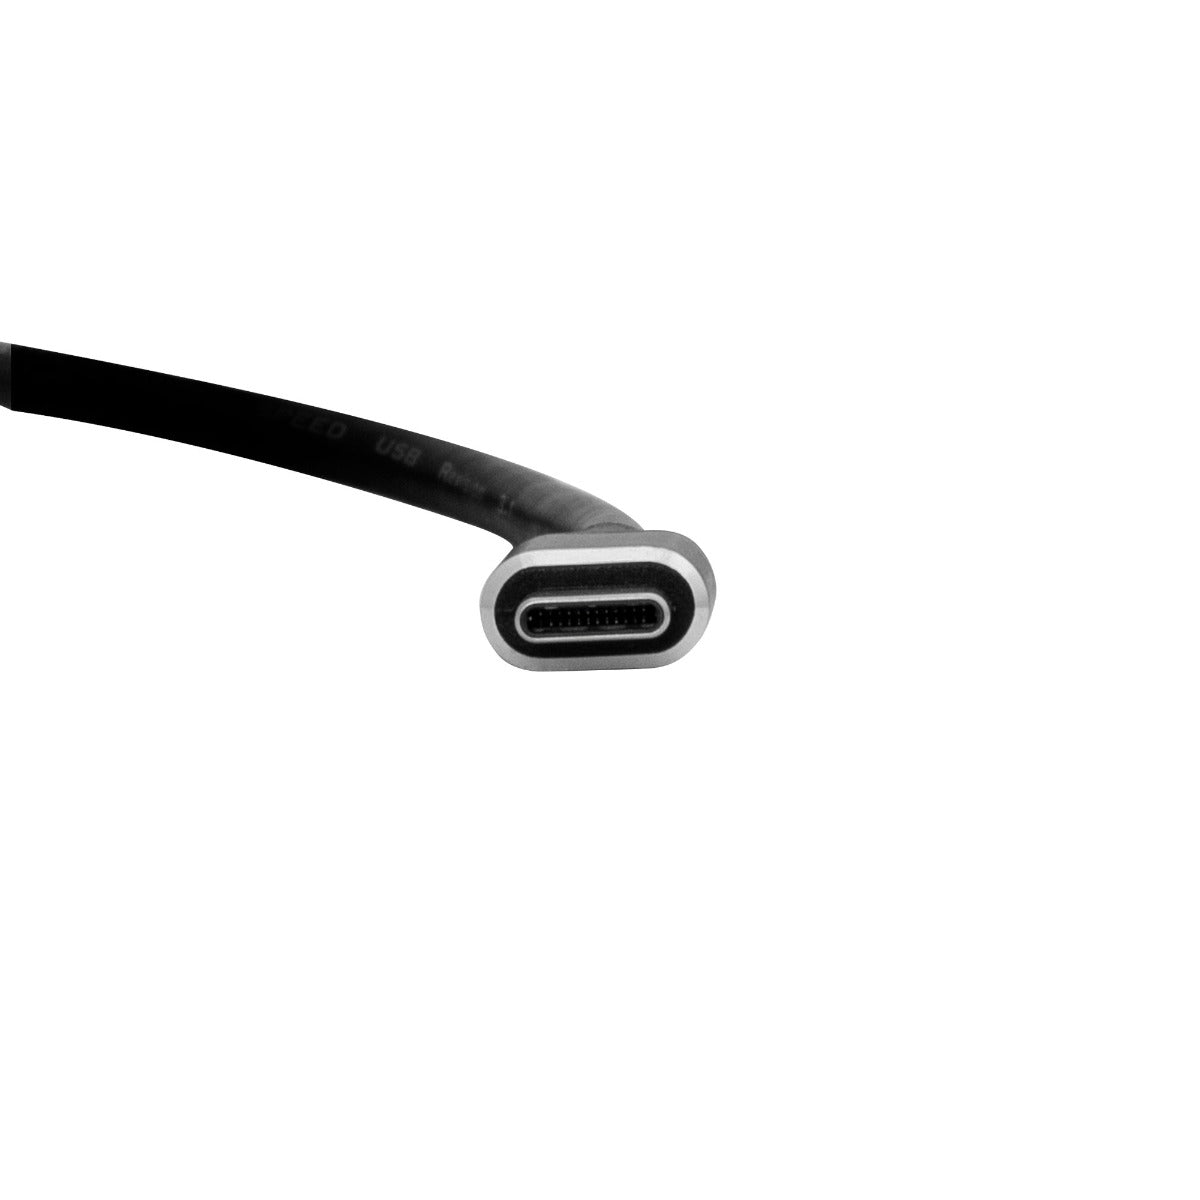 Infinitive USB-C to HDMI Adapter, Black